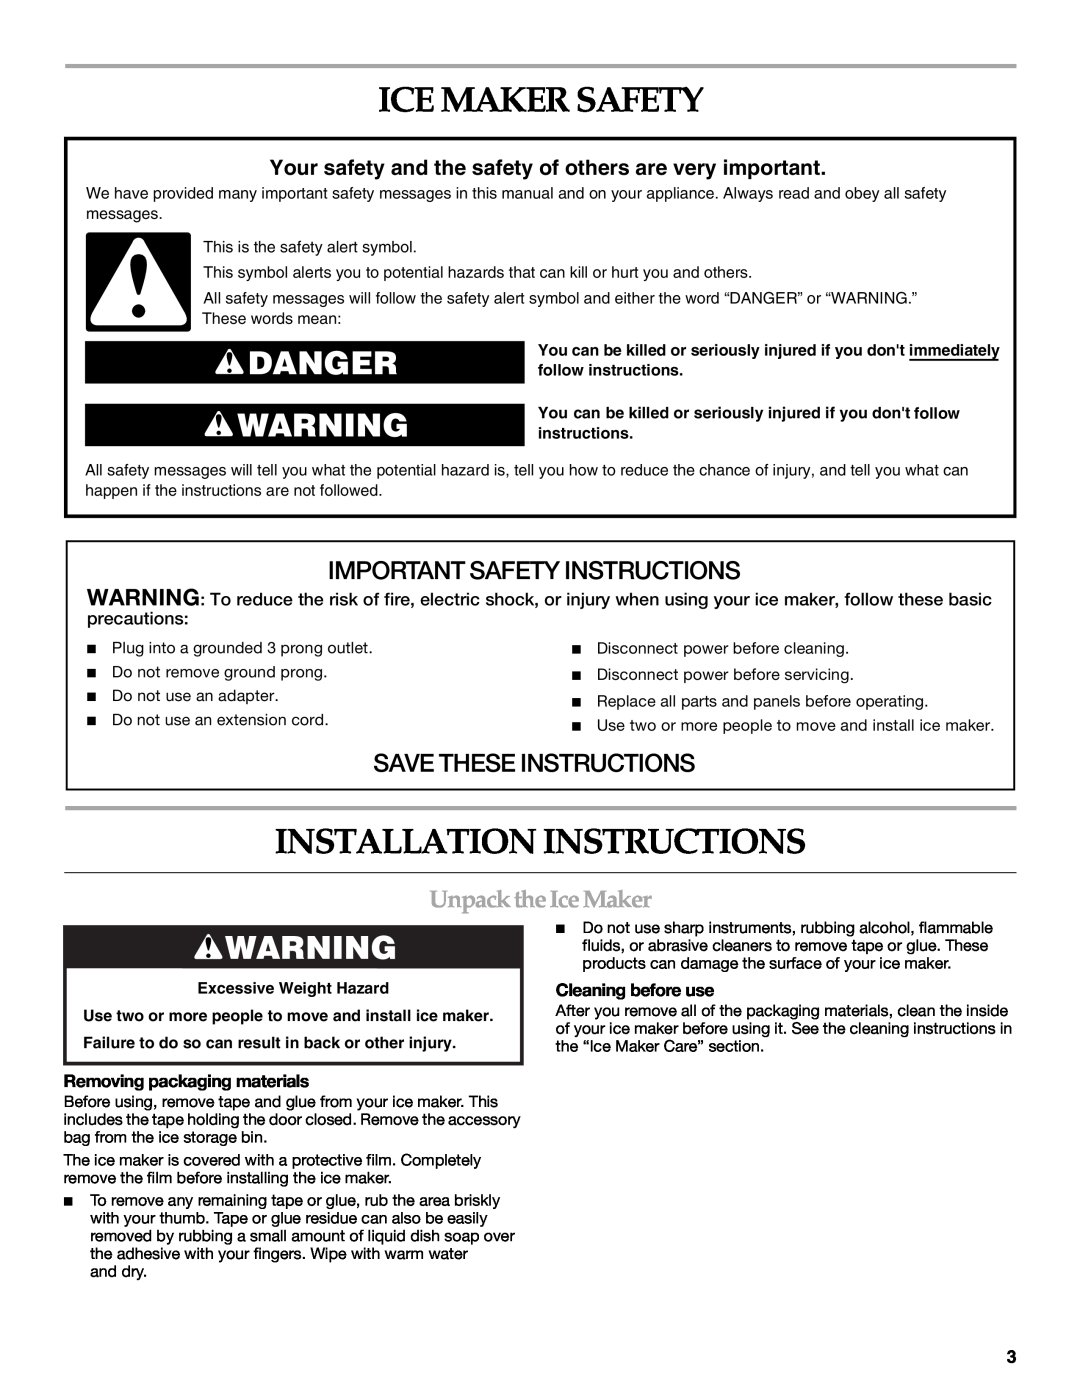 KitchenAid KUIO15NNLS Ice Maker Safety, Installation Instructions, Danger, Important Safety Instructions, precautions 